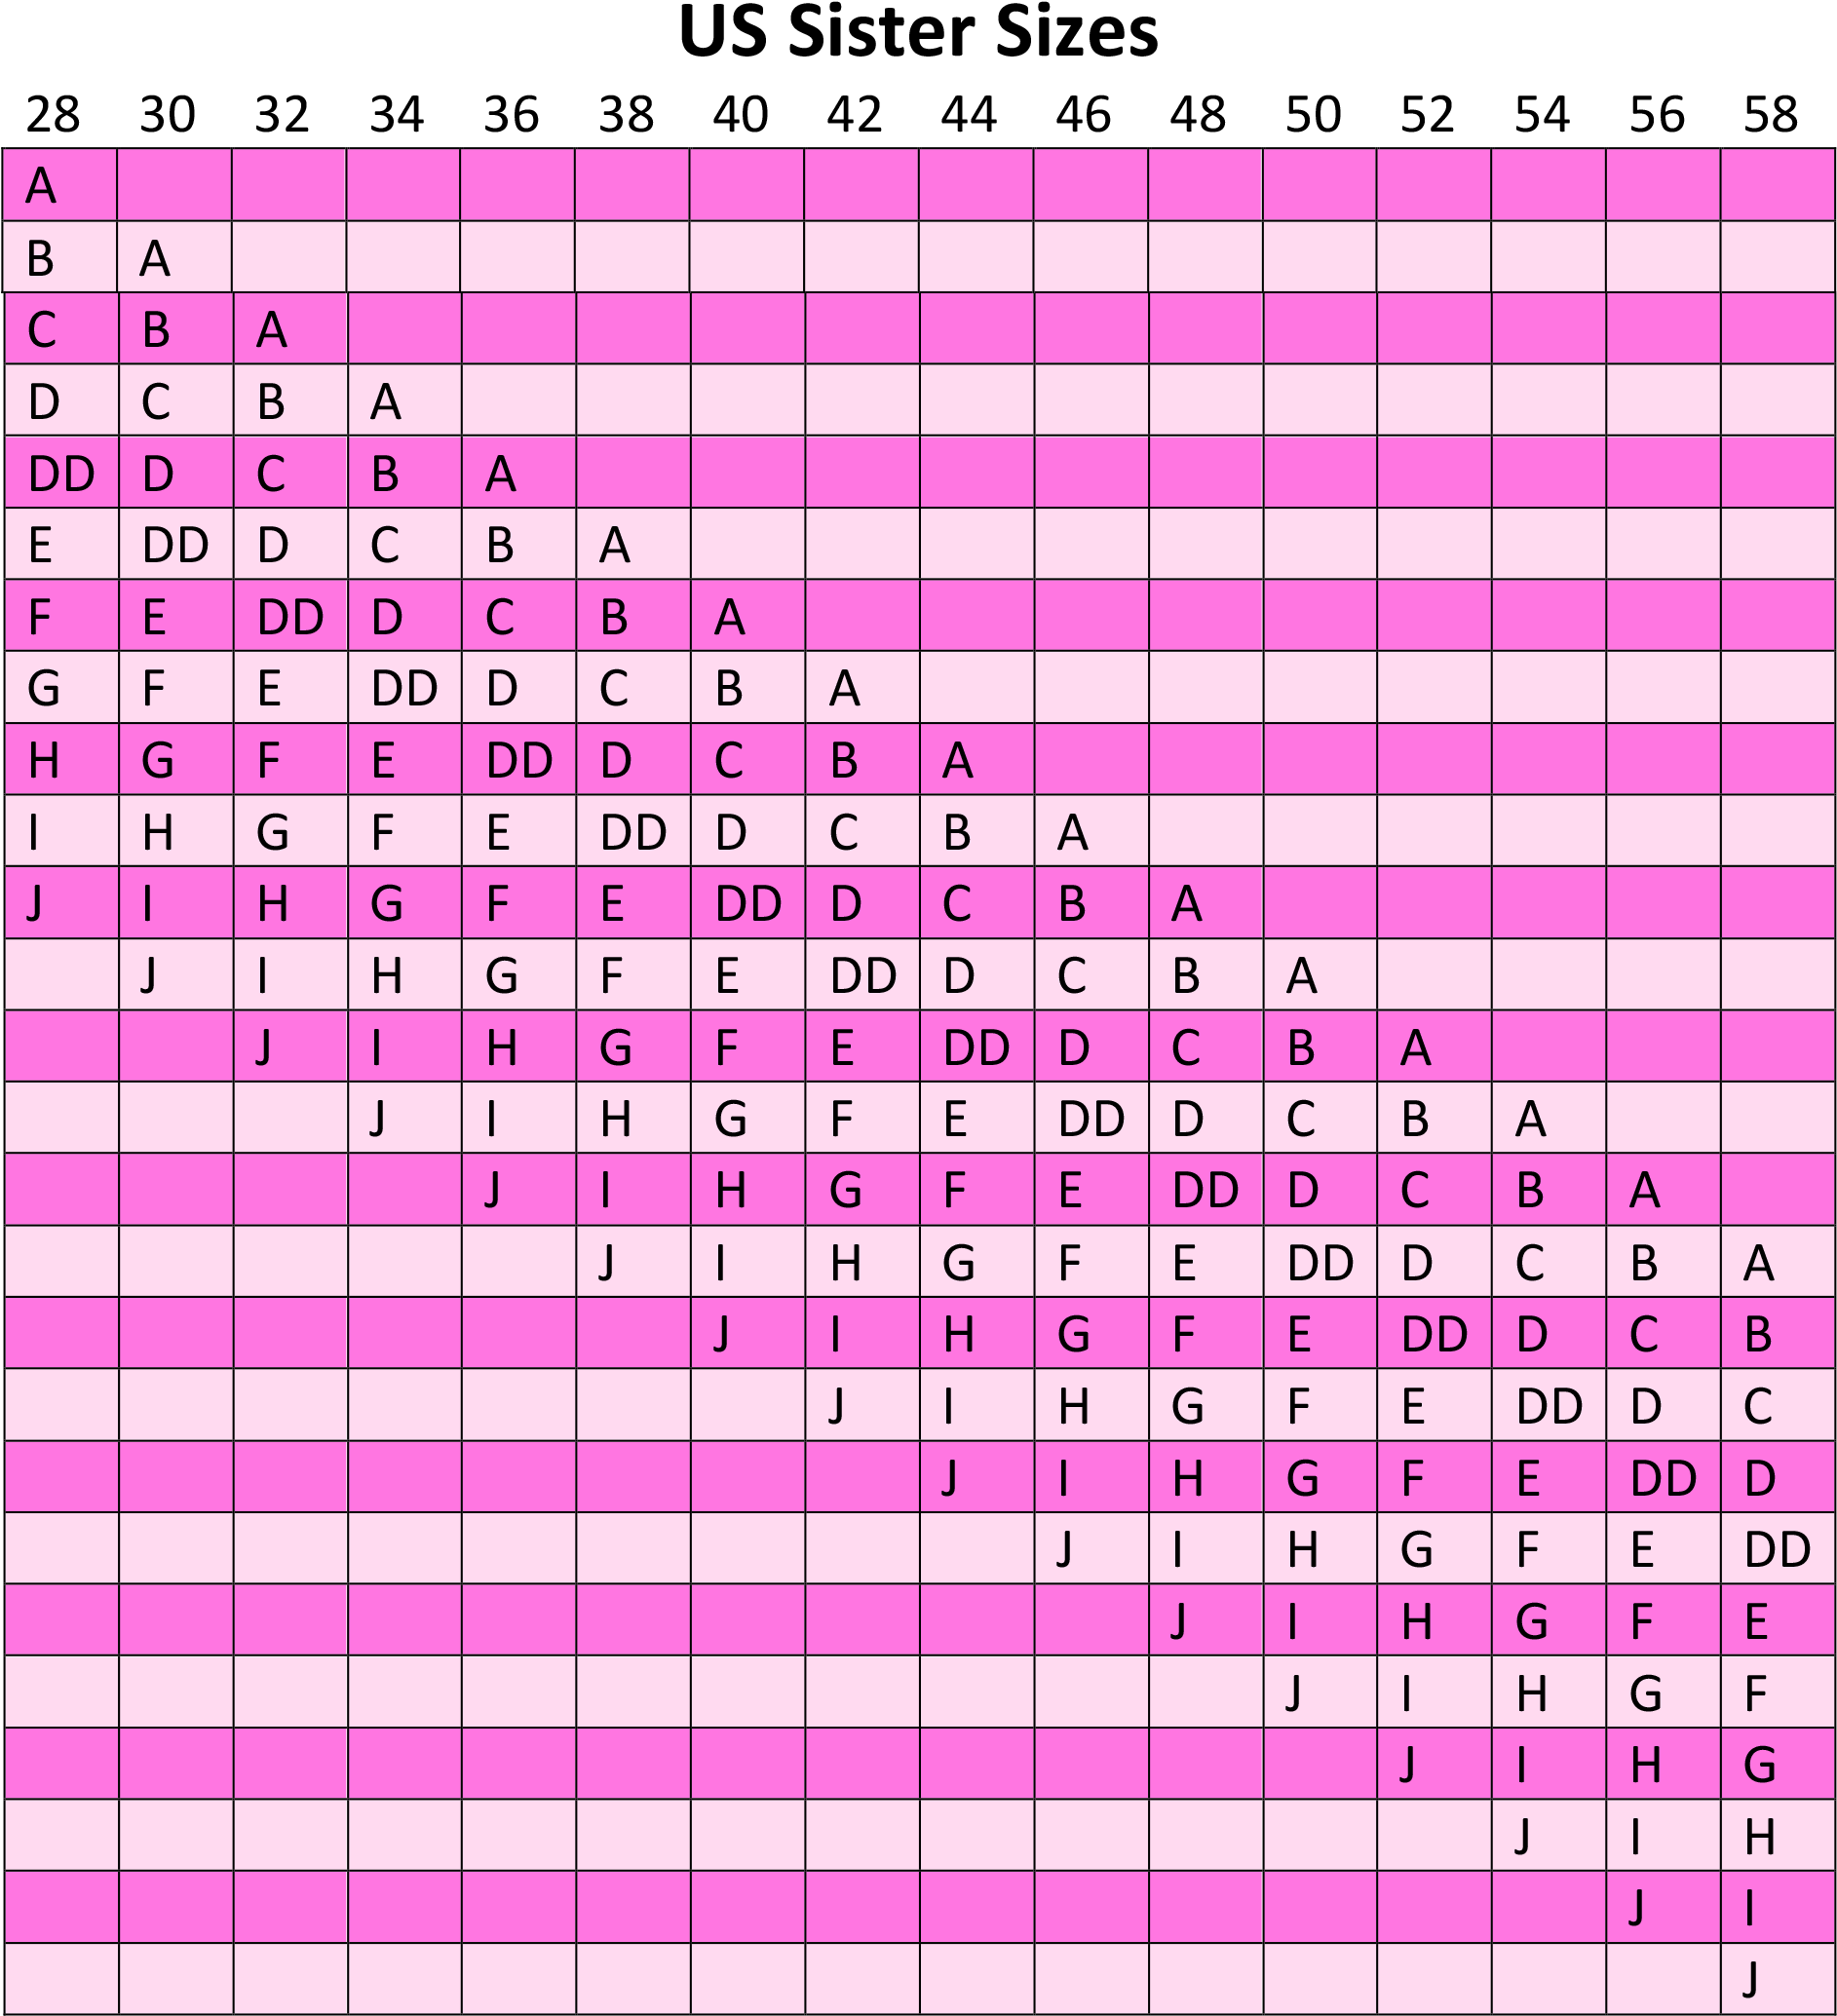 https://www.pngkey.com/png/full/968-9682905_229-x-bra-sister-size-chart-us.png